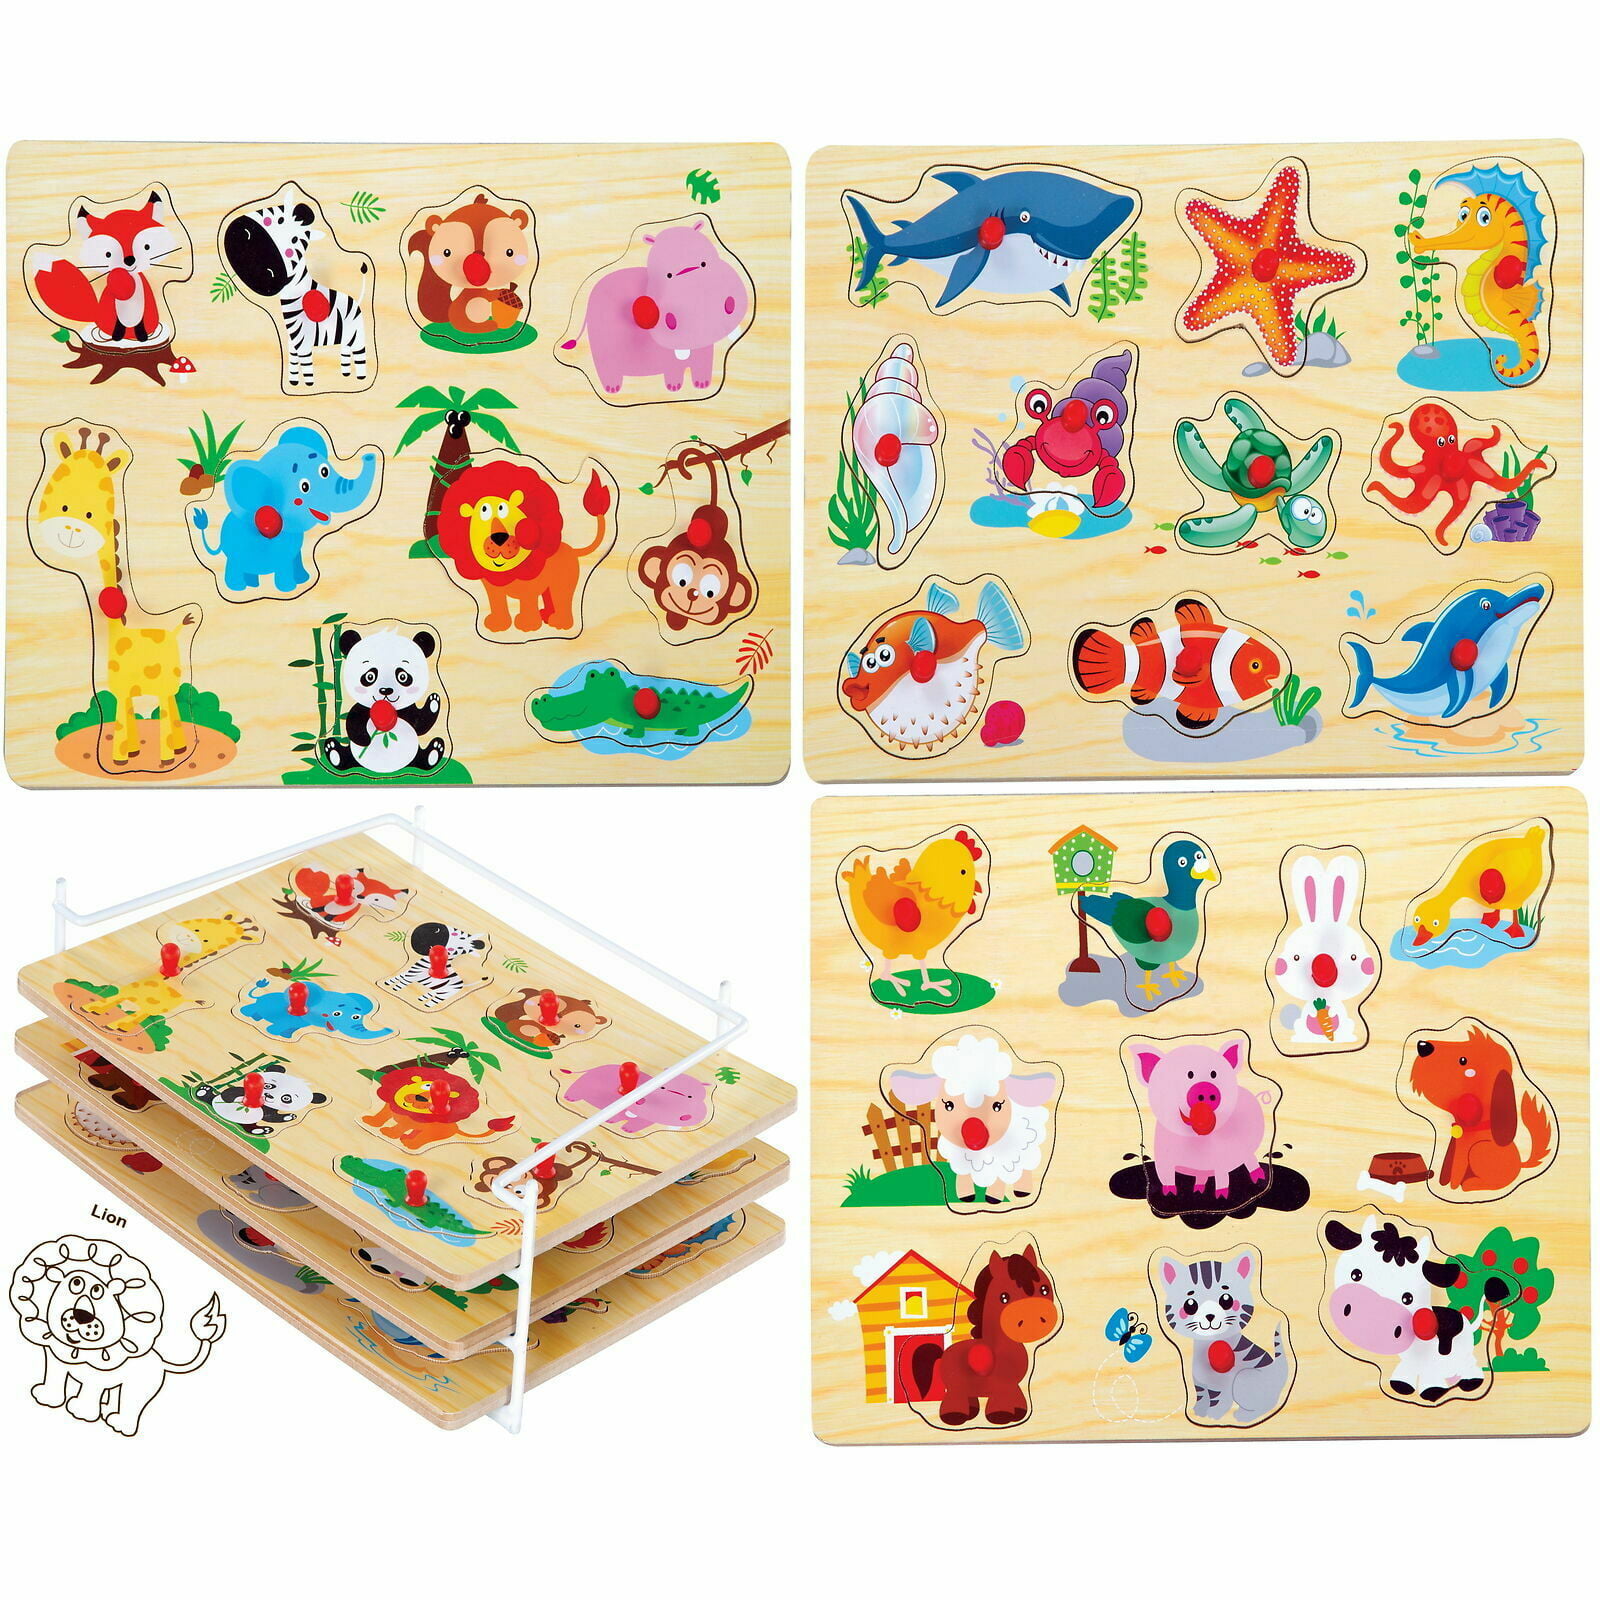 2pcs/set Classic Wooden Peg Puzzles Animal Jigsaw Learning Toy for Kids 